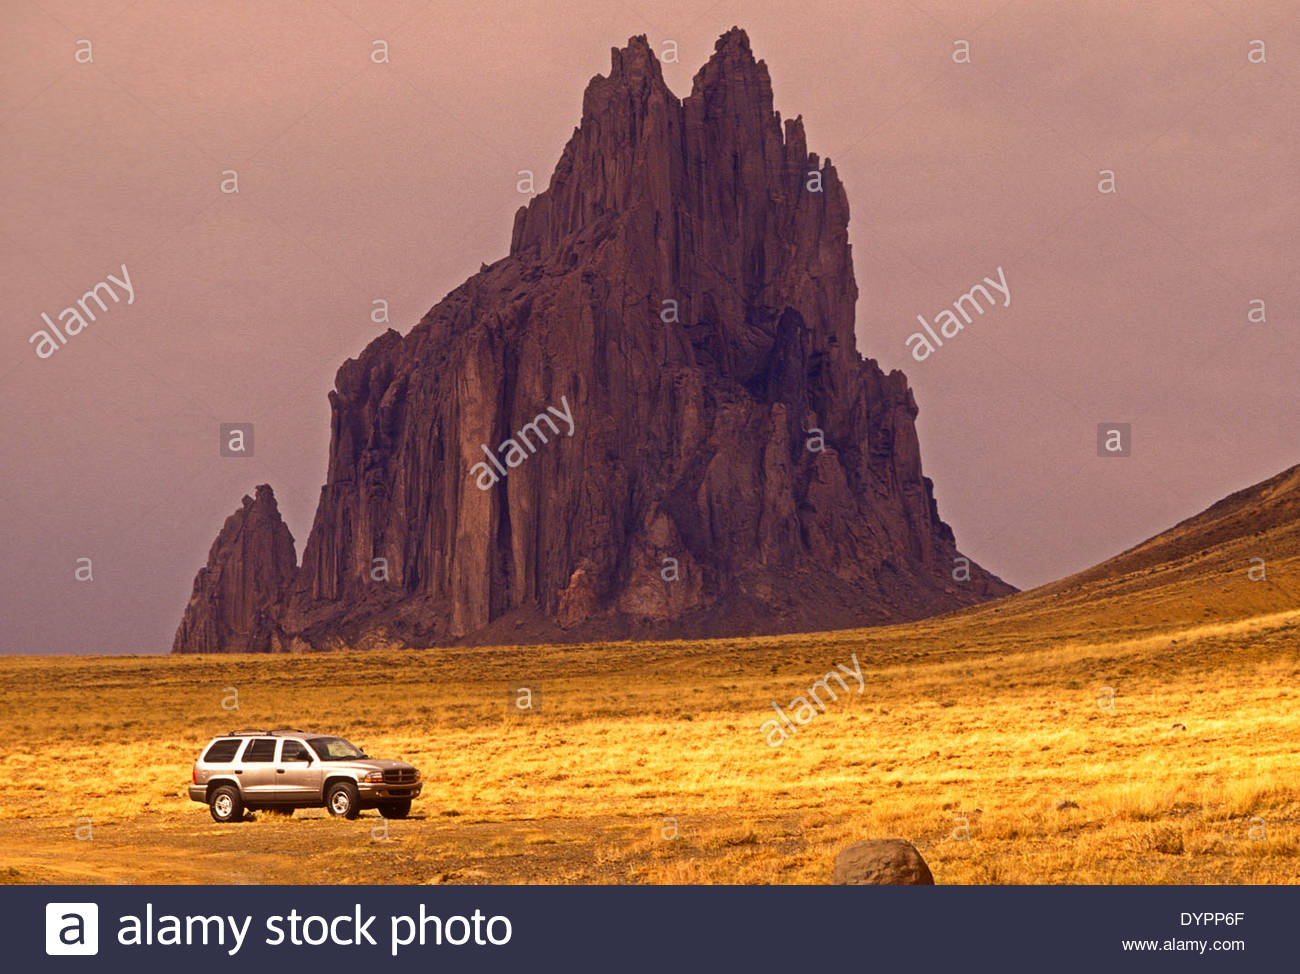 Dodge Durango Ssuv Parked In The Desert With Navajo Ship Rock